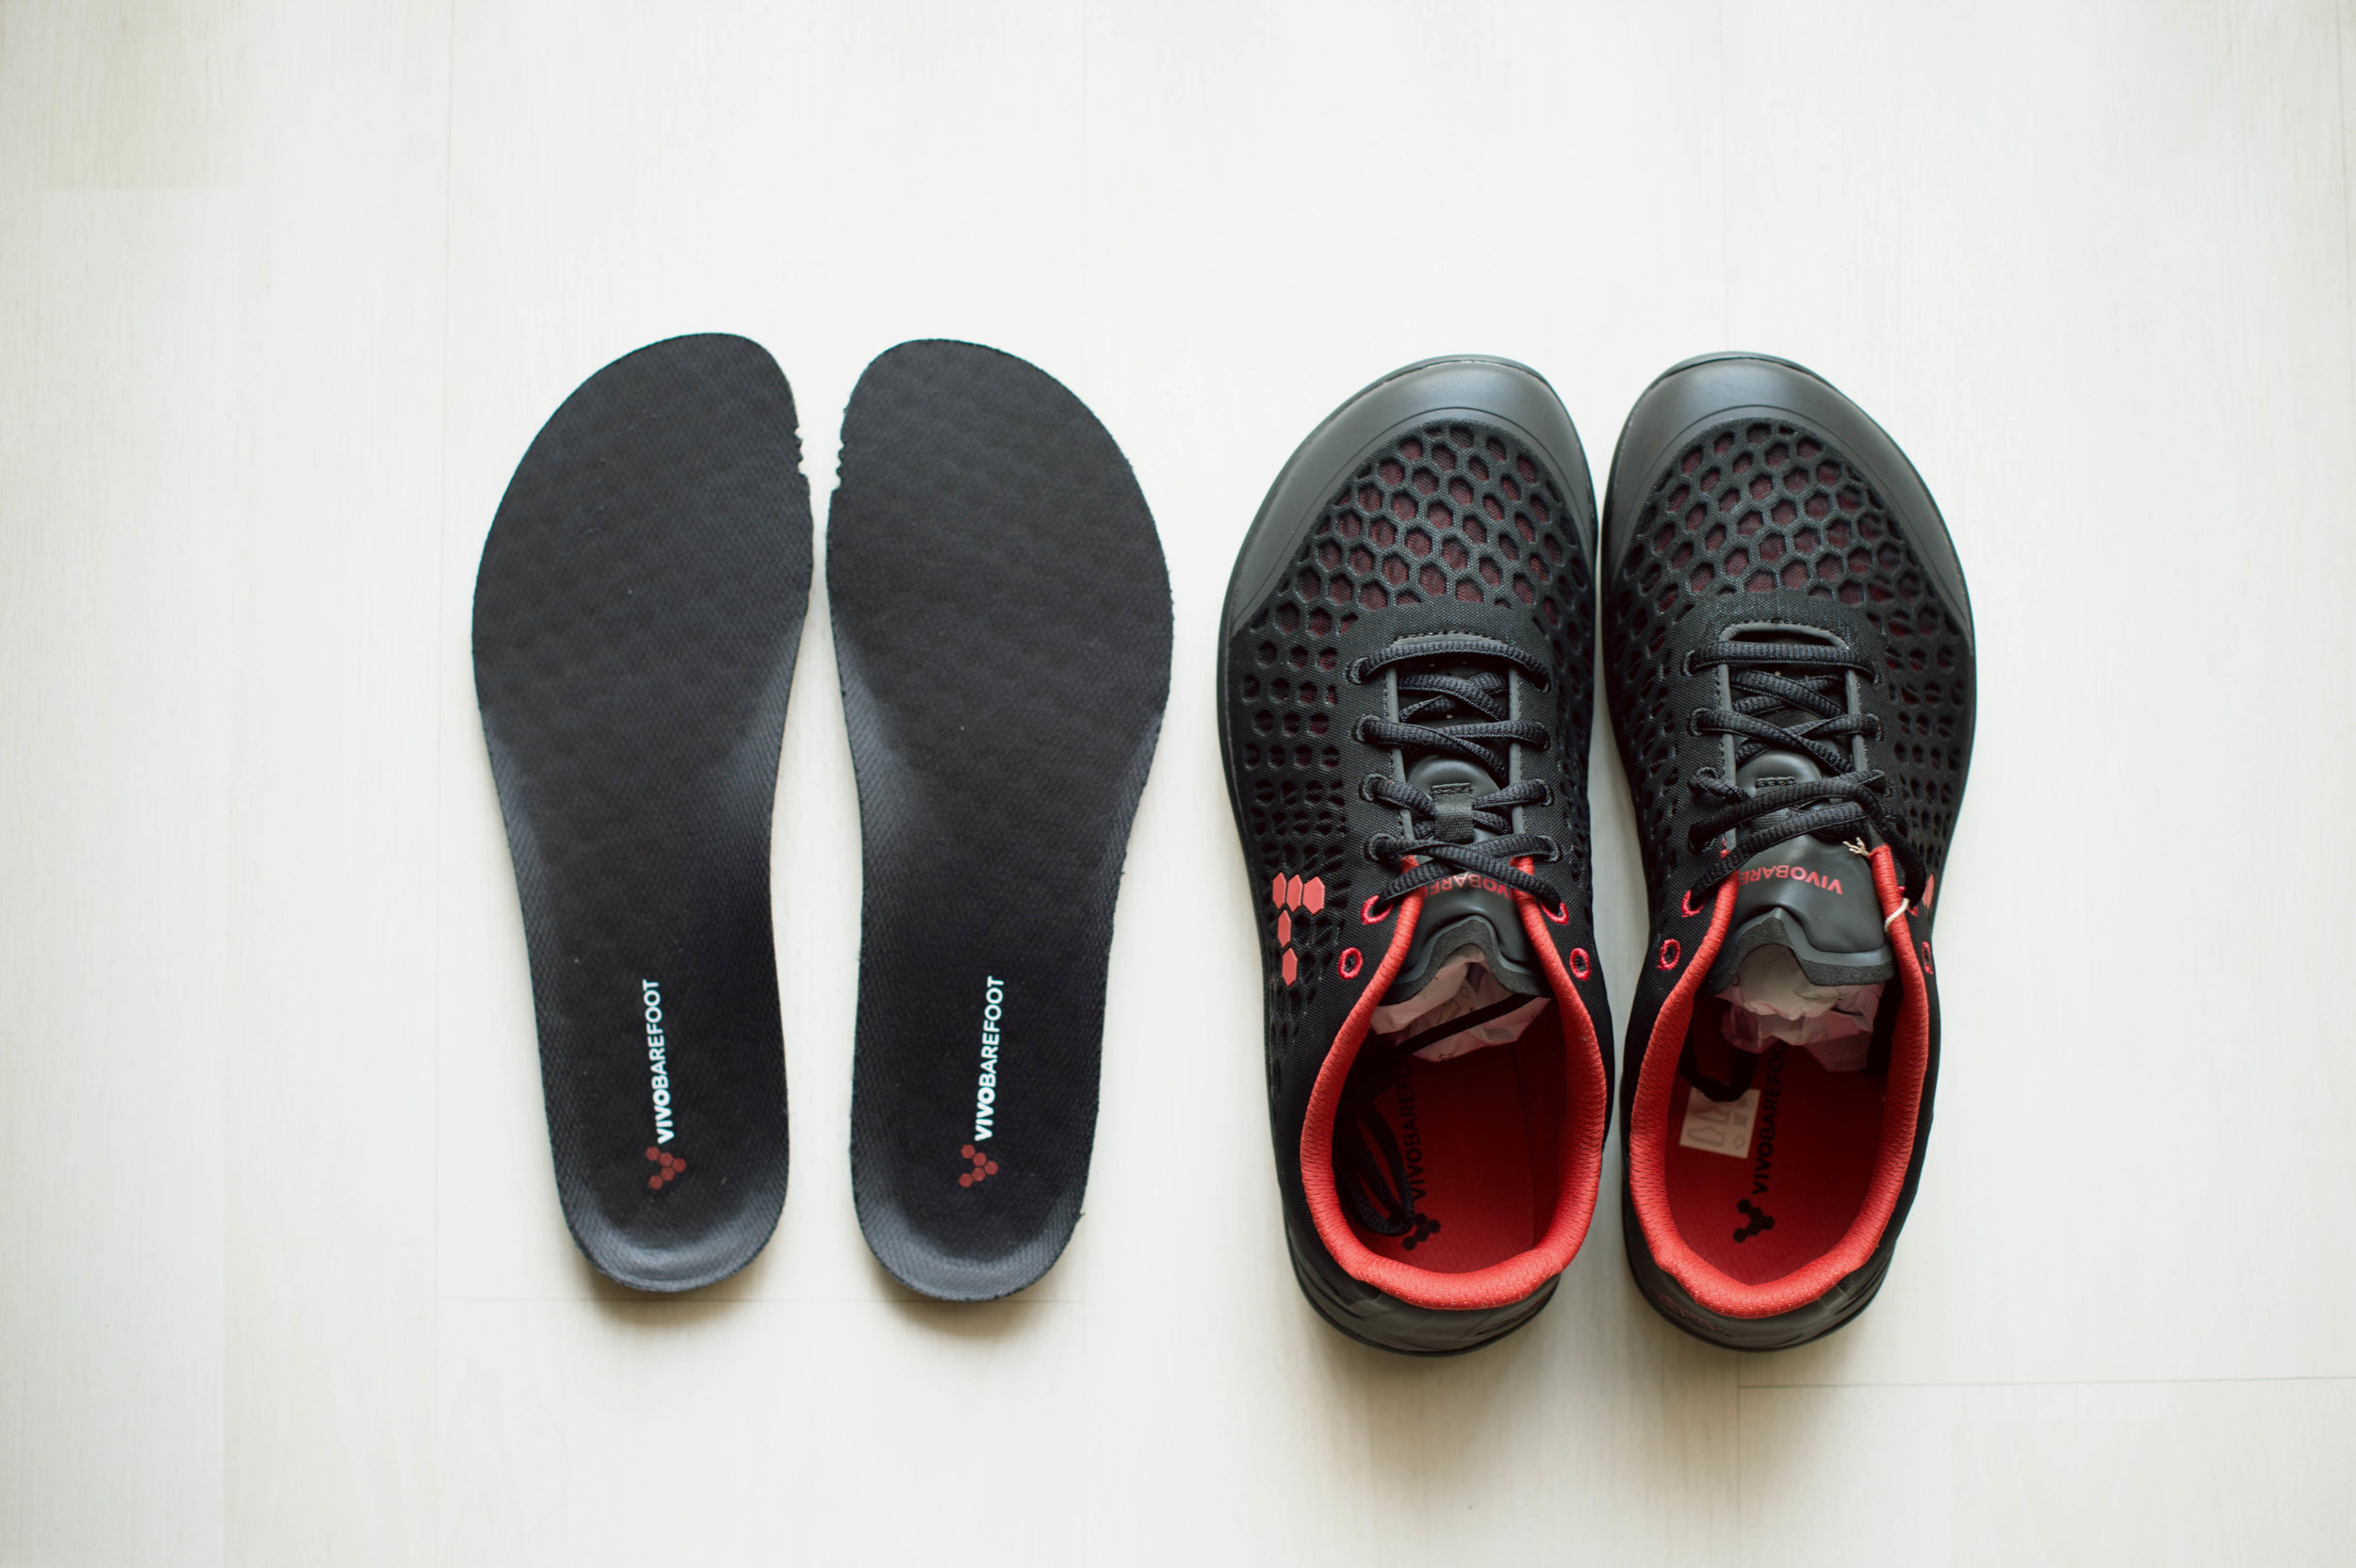 VIVOBAREFOOT - Stealth II - Review 